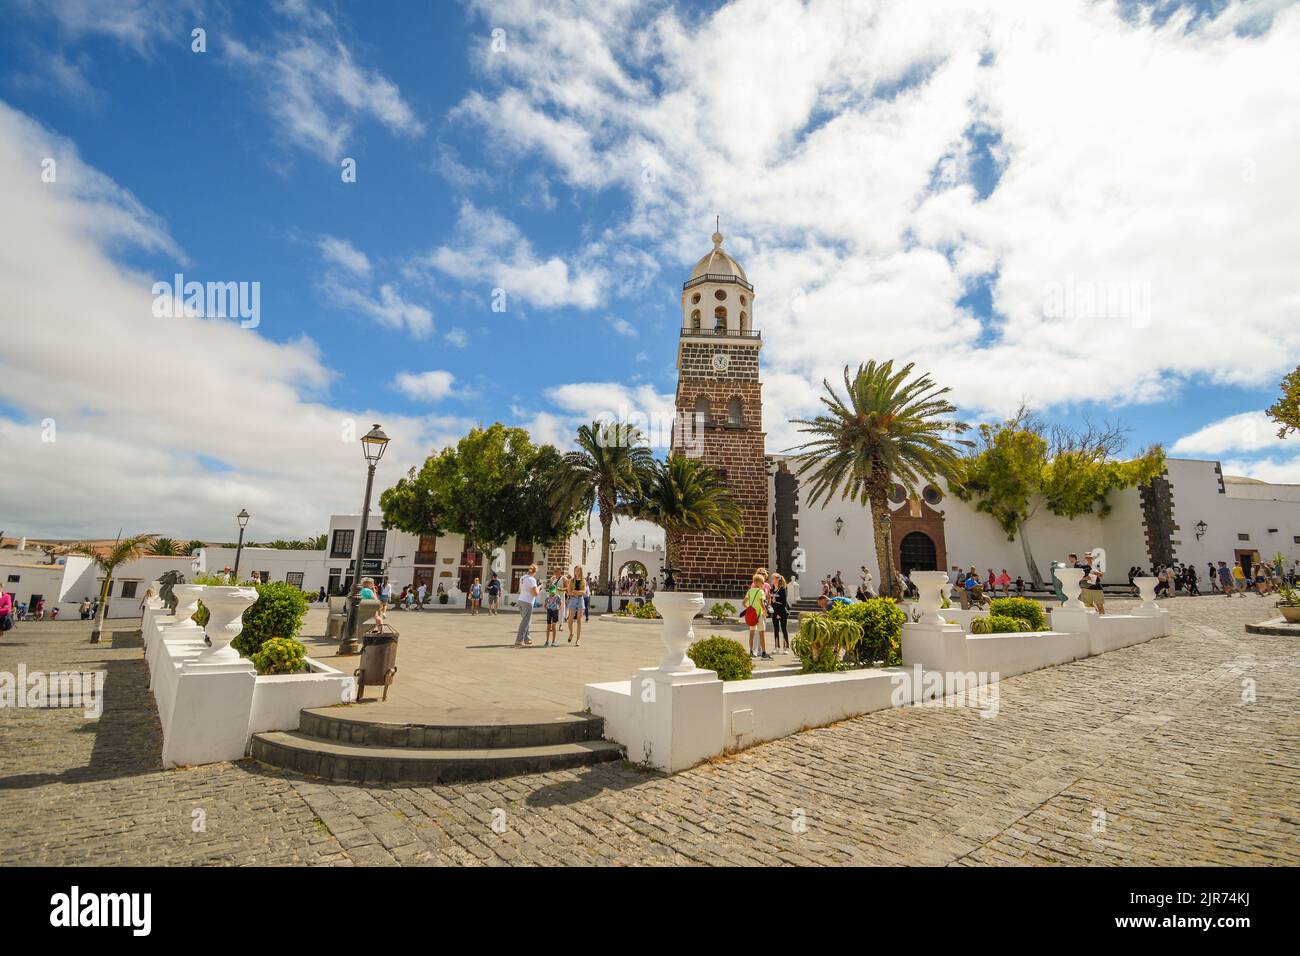 Our Lady of Guadalupe Church in Teguise, Lanzarote Stock Photo